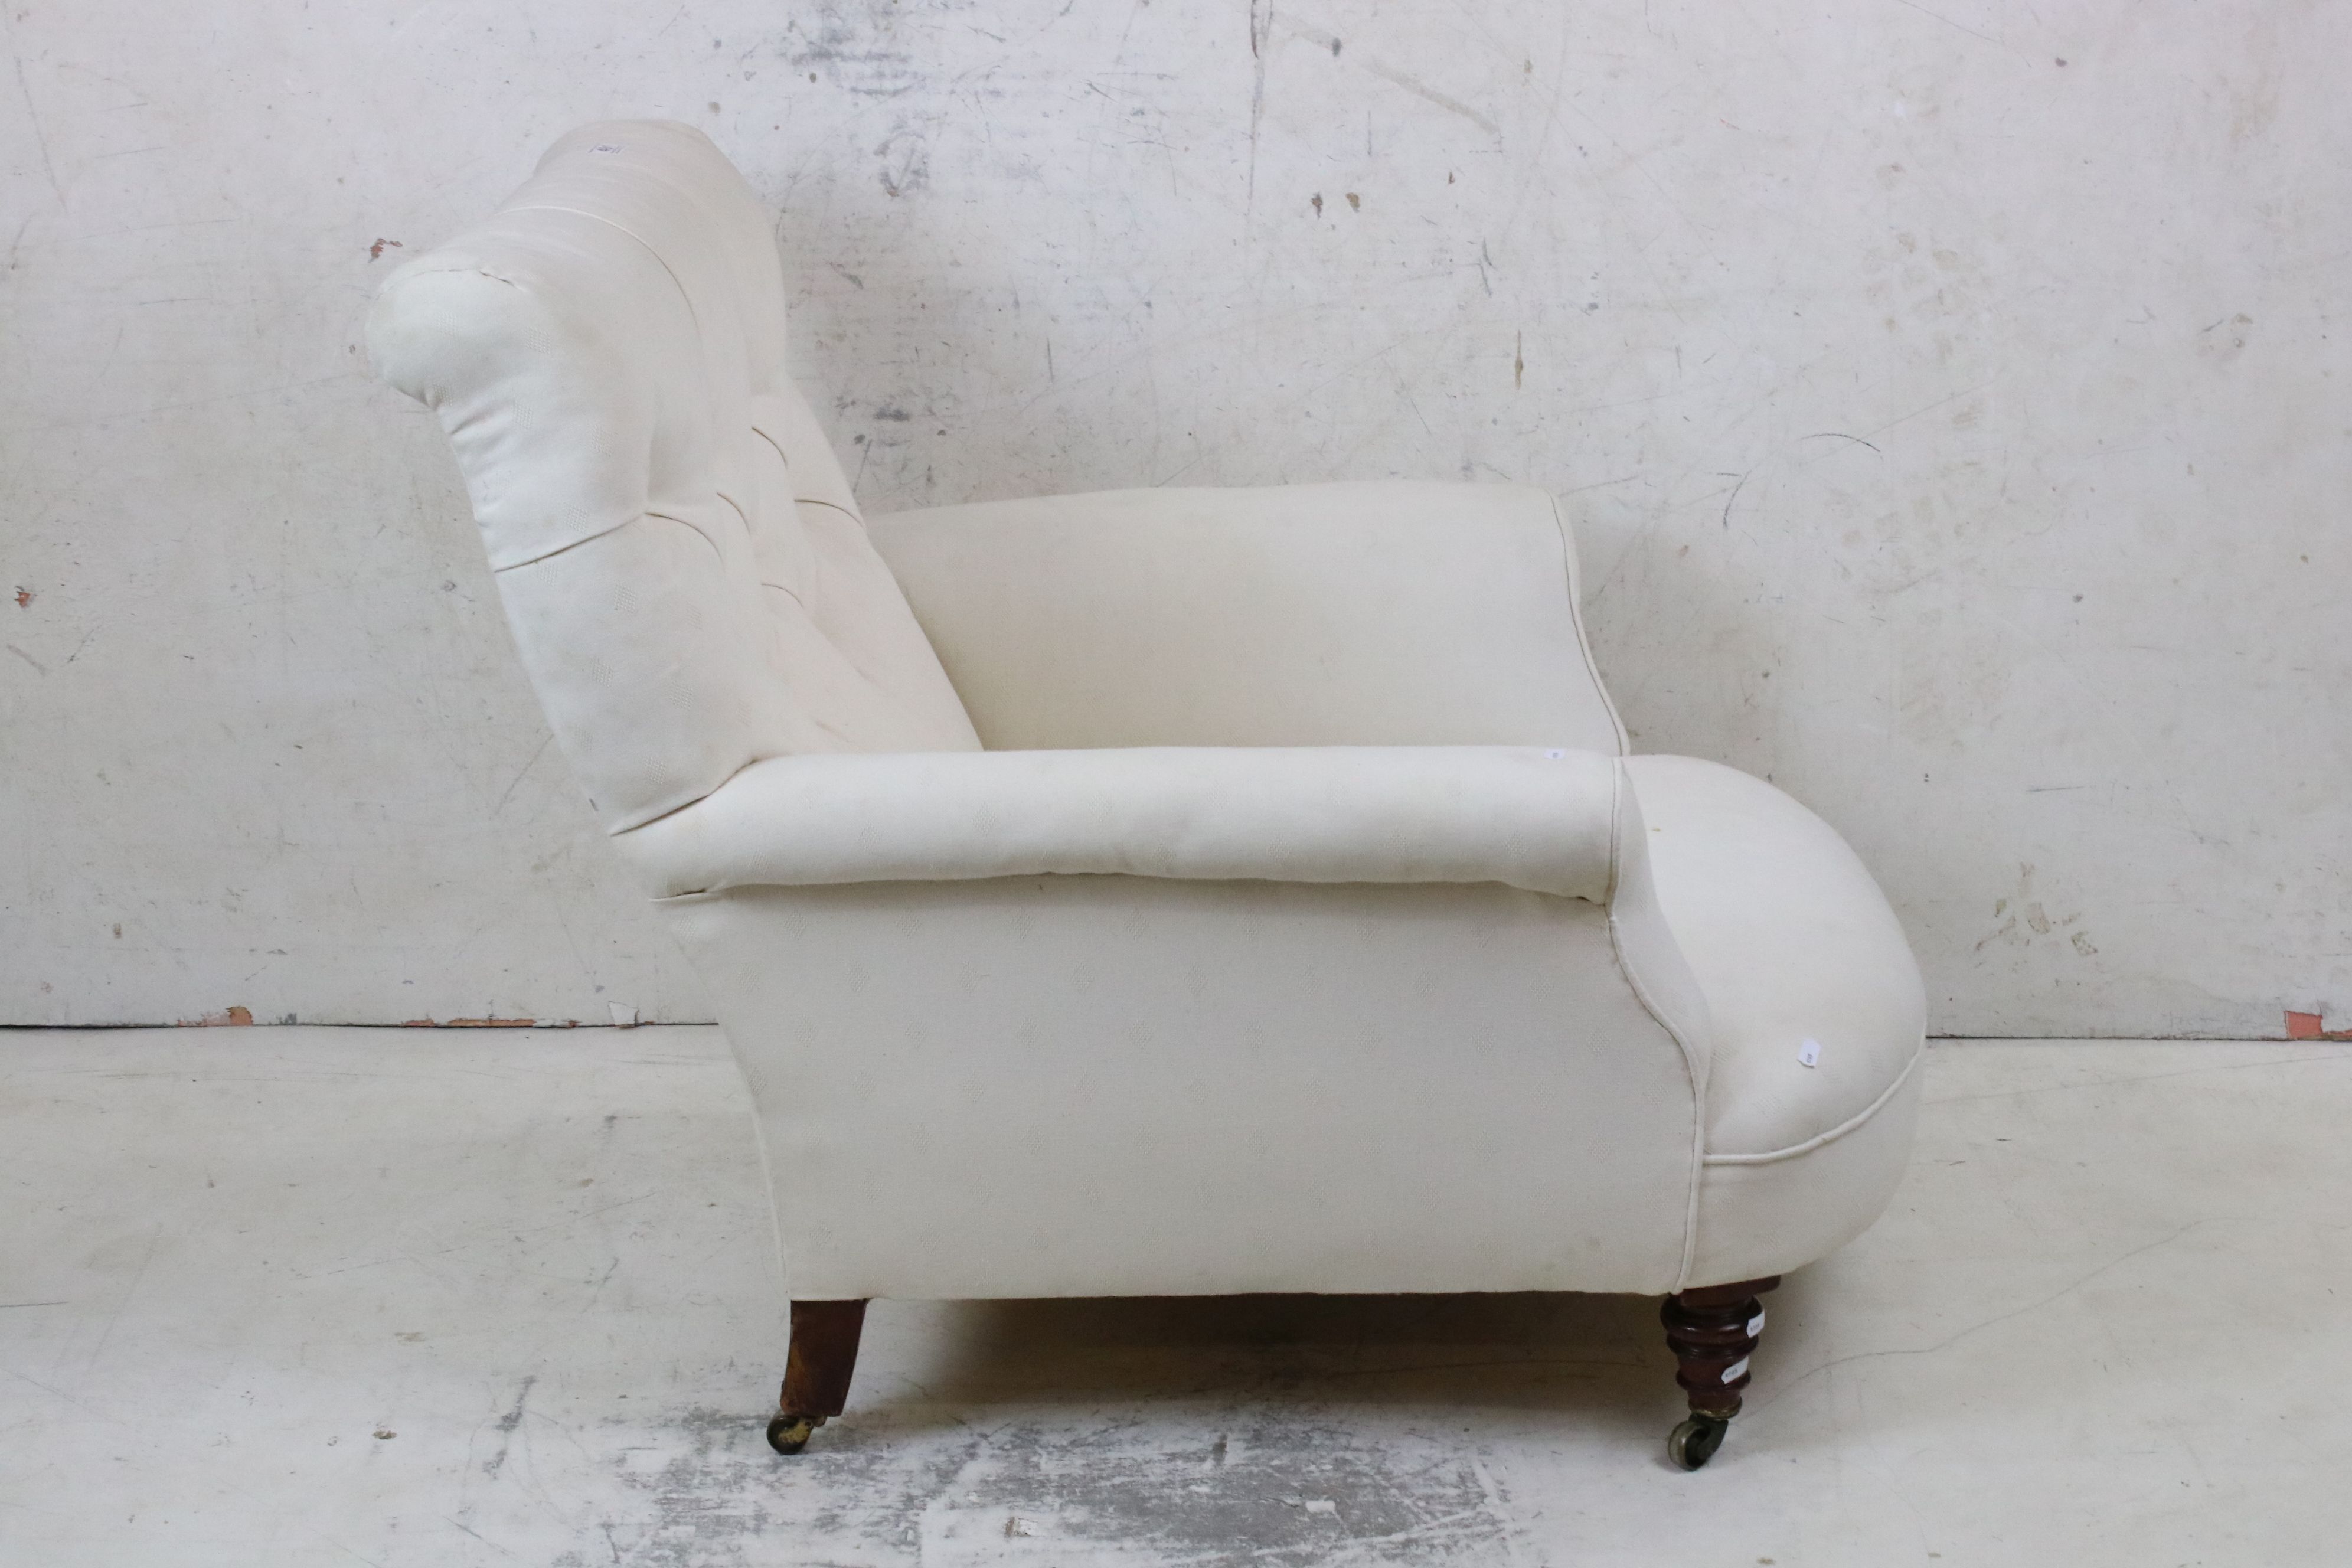 19th century Armchair, in the manner of Howard & Sons, with cream button back upholstery, raised - Image 2 of 4